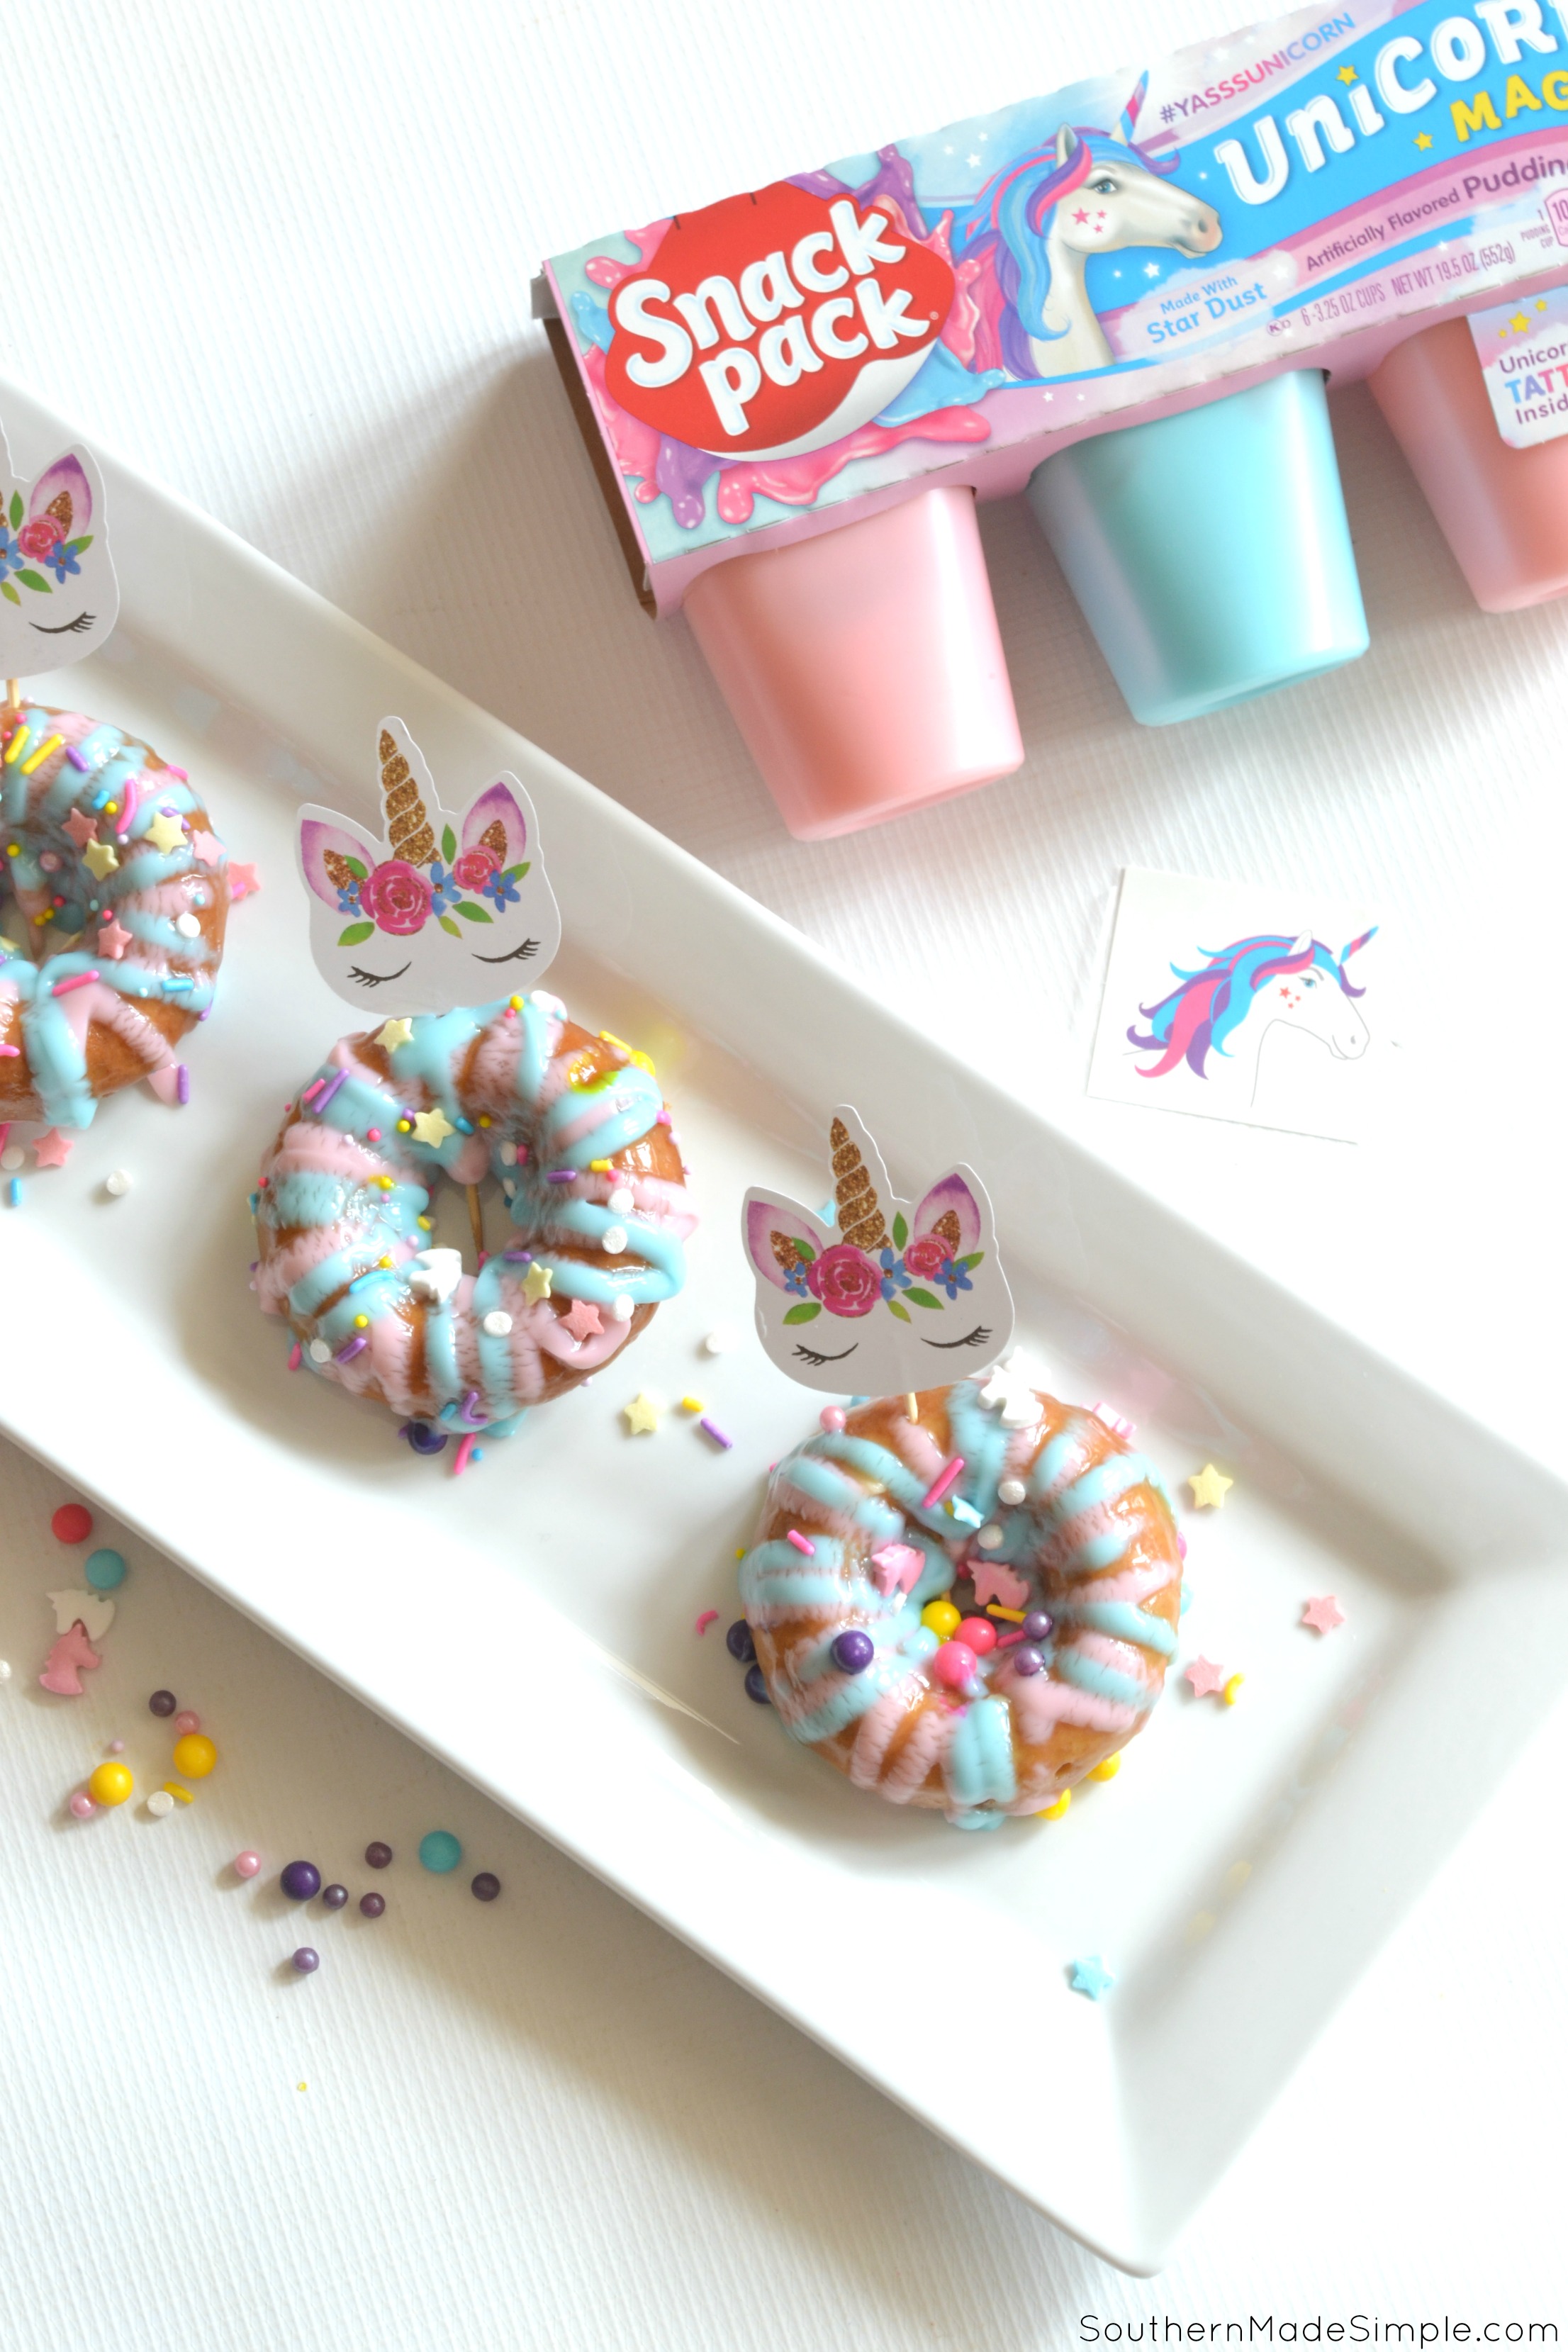 Enchanted Unicorn Doughnuts - a spectacularly sweet treat to pair with Unicorn Snack Packs to spark a little mystical and magical fun into anyone's day! #UnicornSnackPack #YasssUnicorn #UnicornMagic #ad